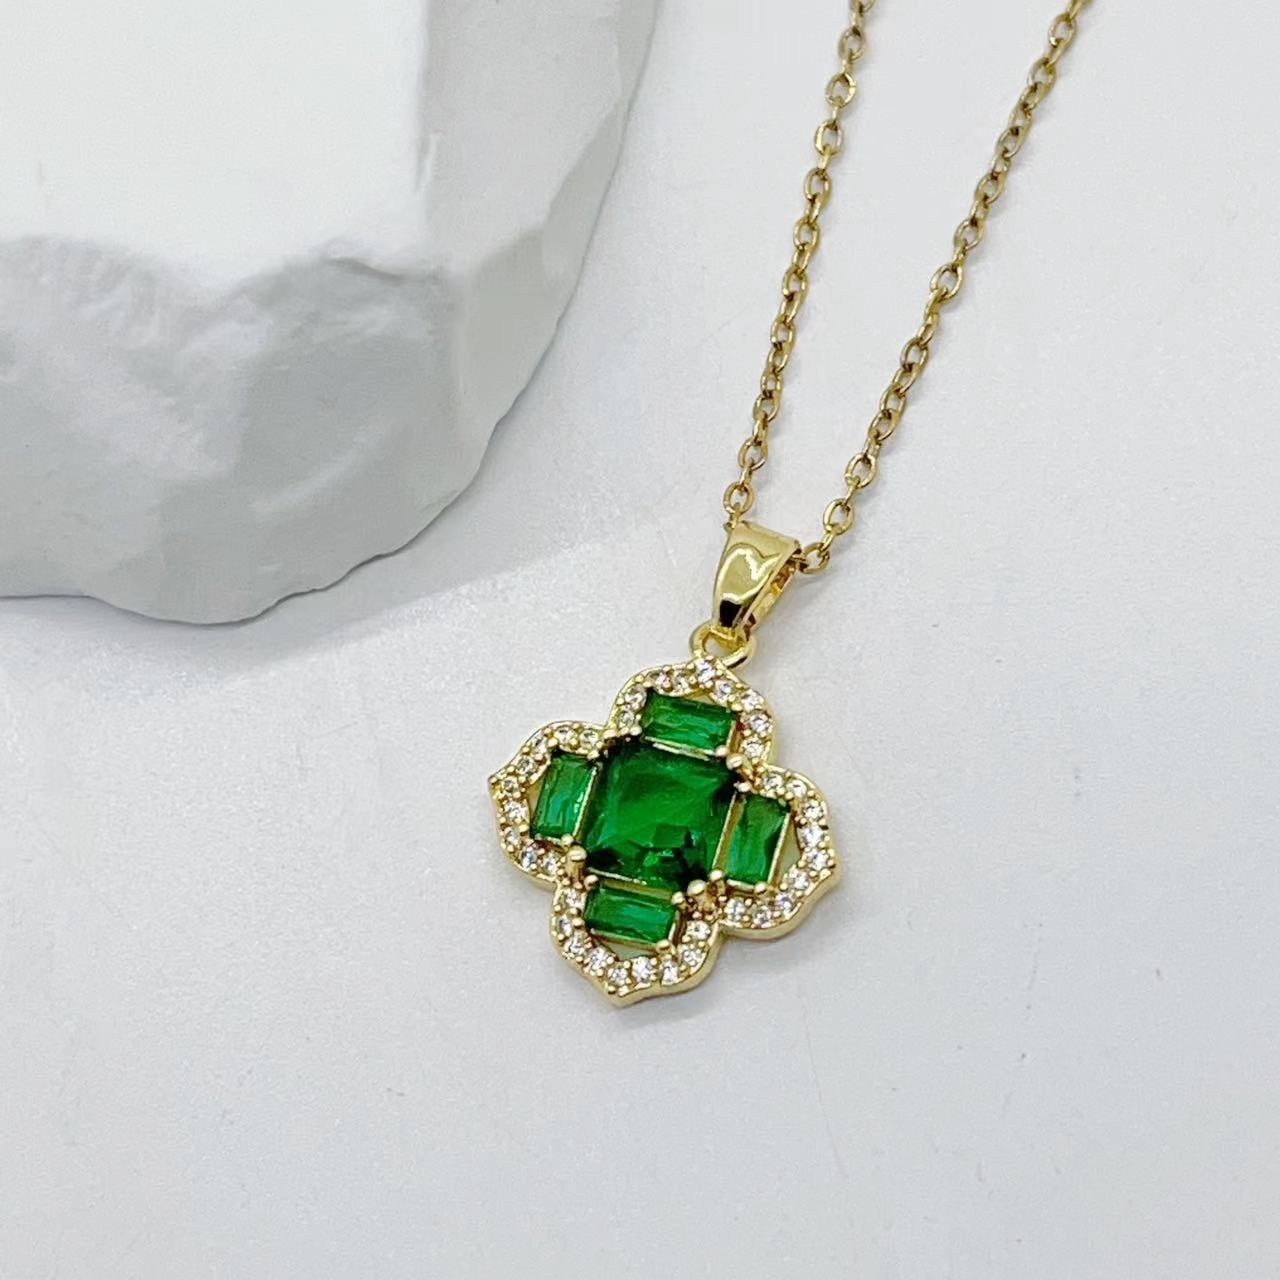 Europe and America Cross Border New Copper Micro Inlay Ladder Square Zircon Colorful Four-Leaf Clover Temperament Entry Lux Simple All-Match Clavicle Chain